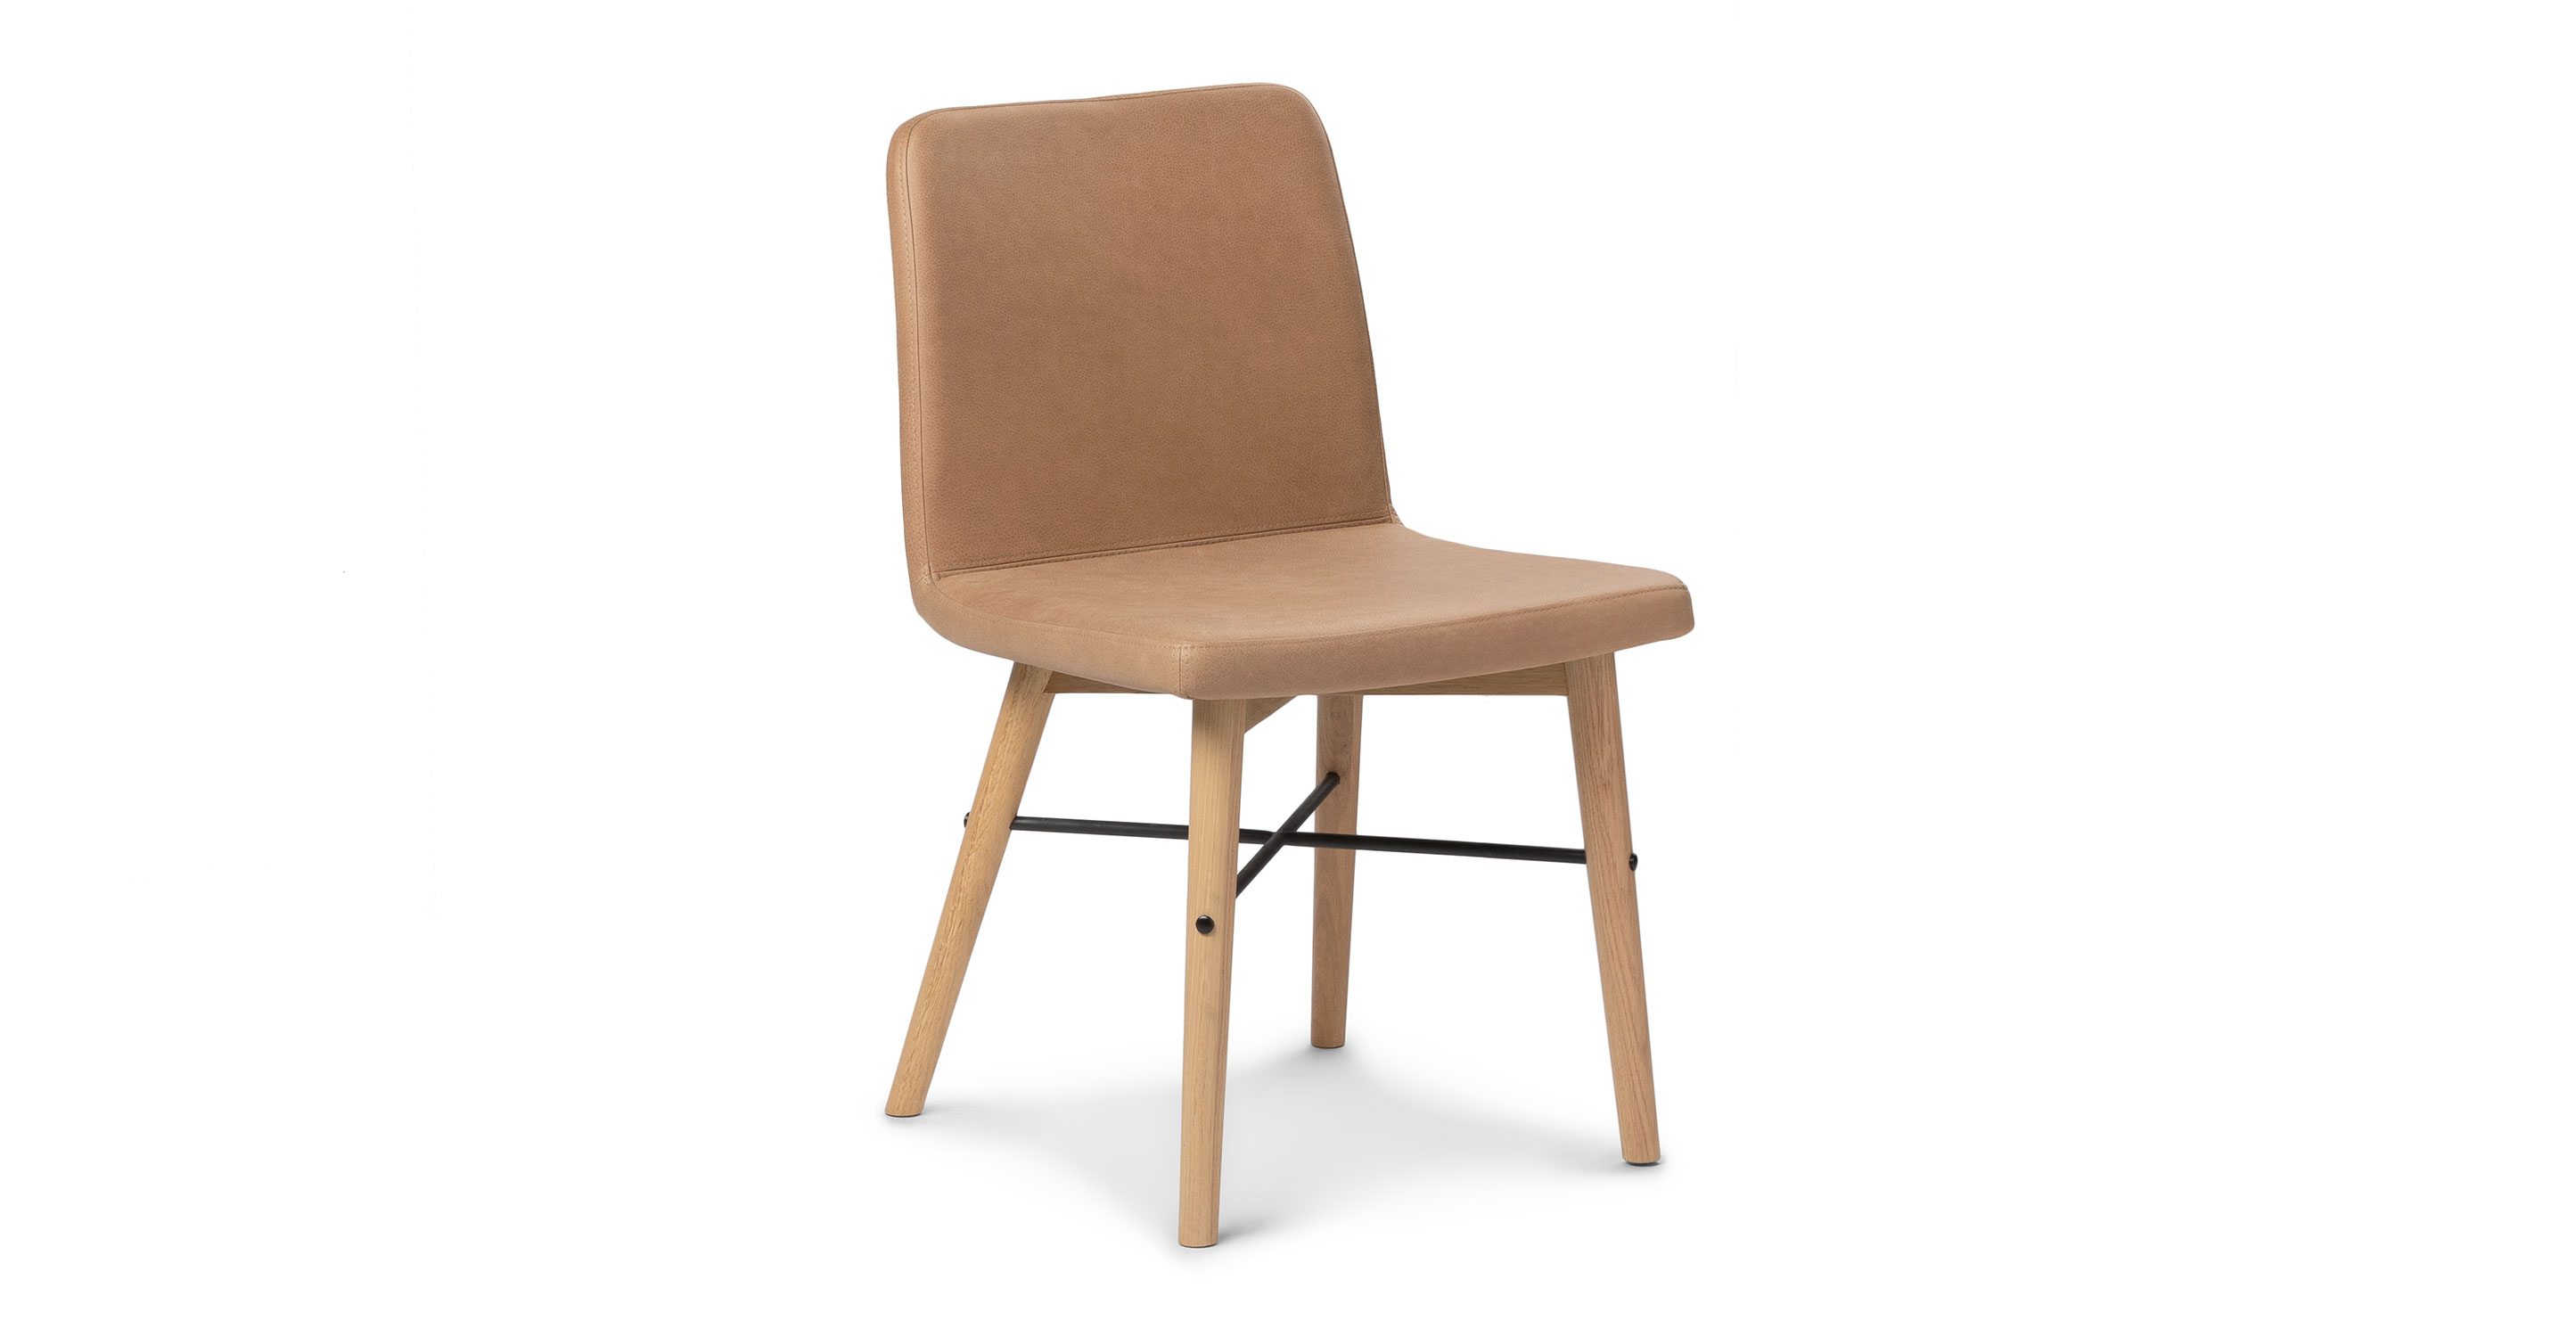 Canyon Tan Leather Dining Chair Kissa, Tan Leather Dining Chair